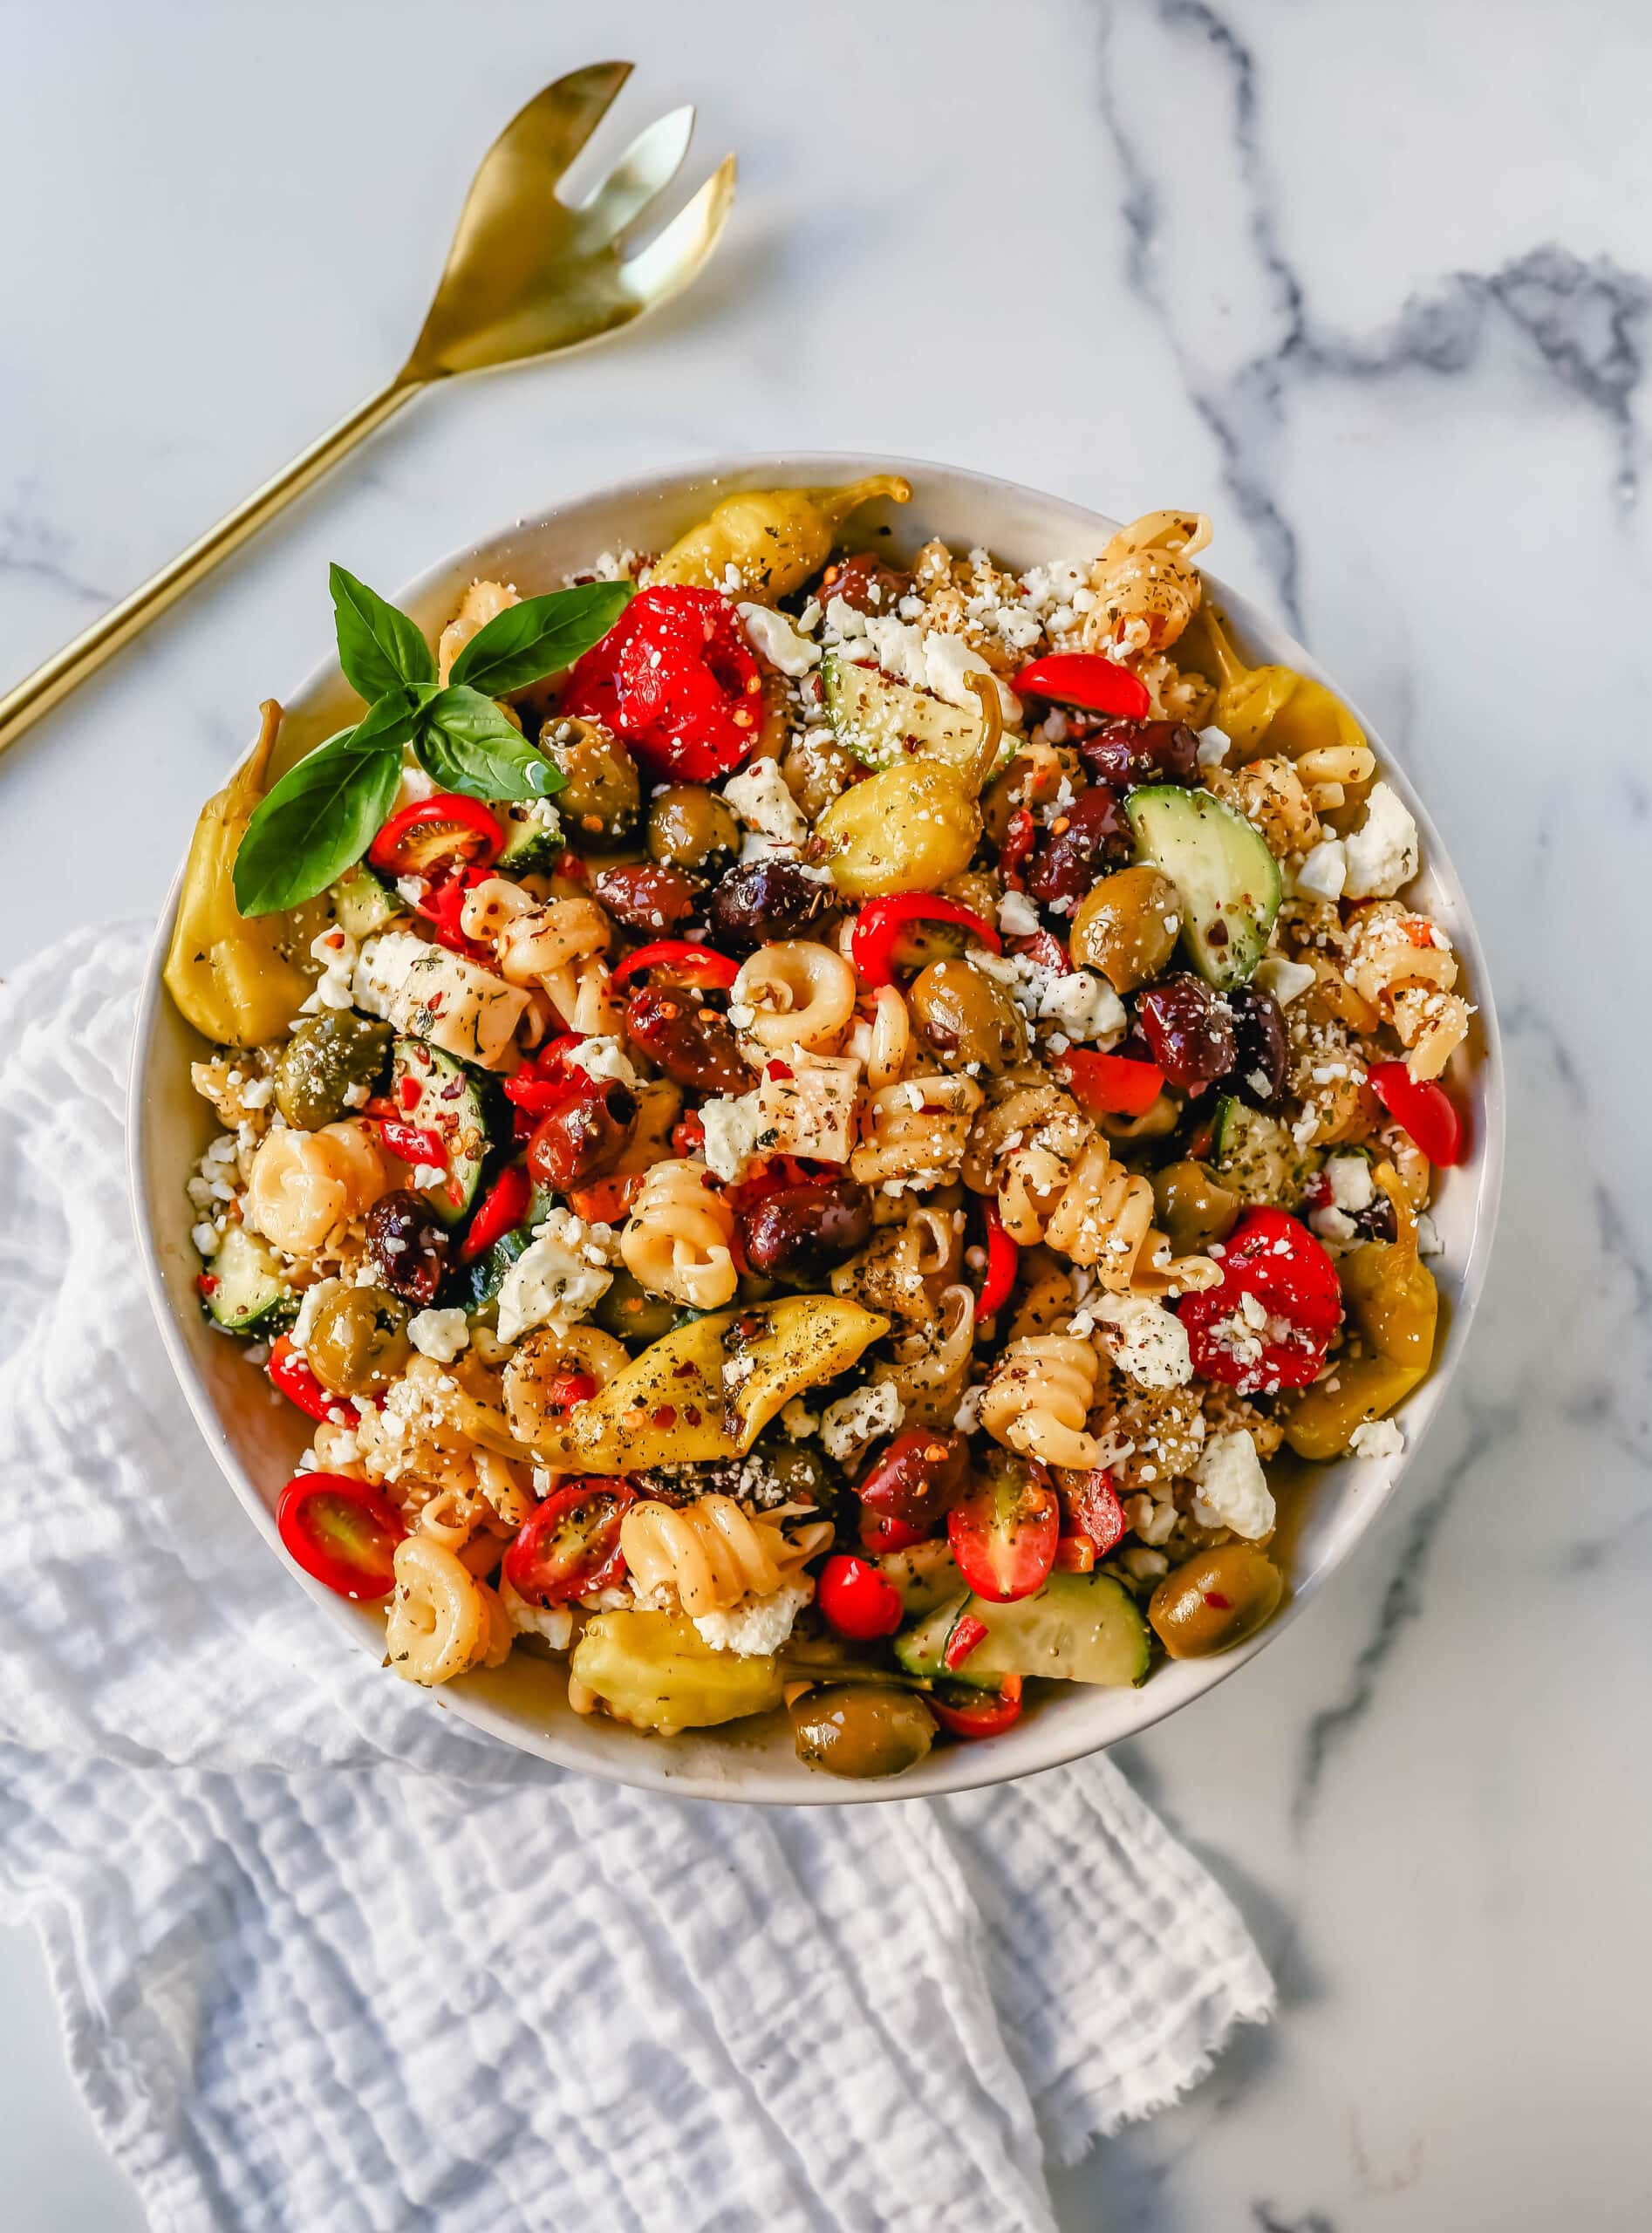 Homemade Greek Pasta Salad made with Pasta, Greek Olives, Feta Cheese, Peppers, Tomatoes, Cucumber, Pepperoncinis, and tossed in a Homemade Greek Dressing. The Best Greek Pasta Salad Recipe!